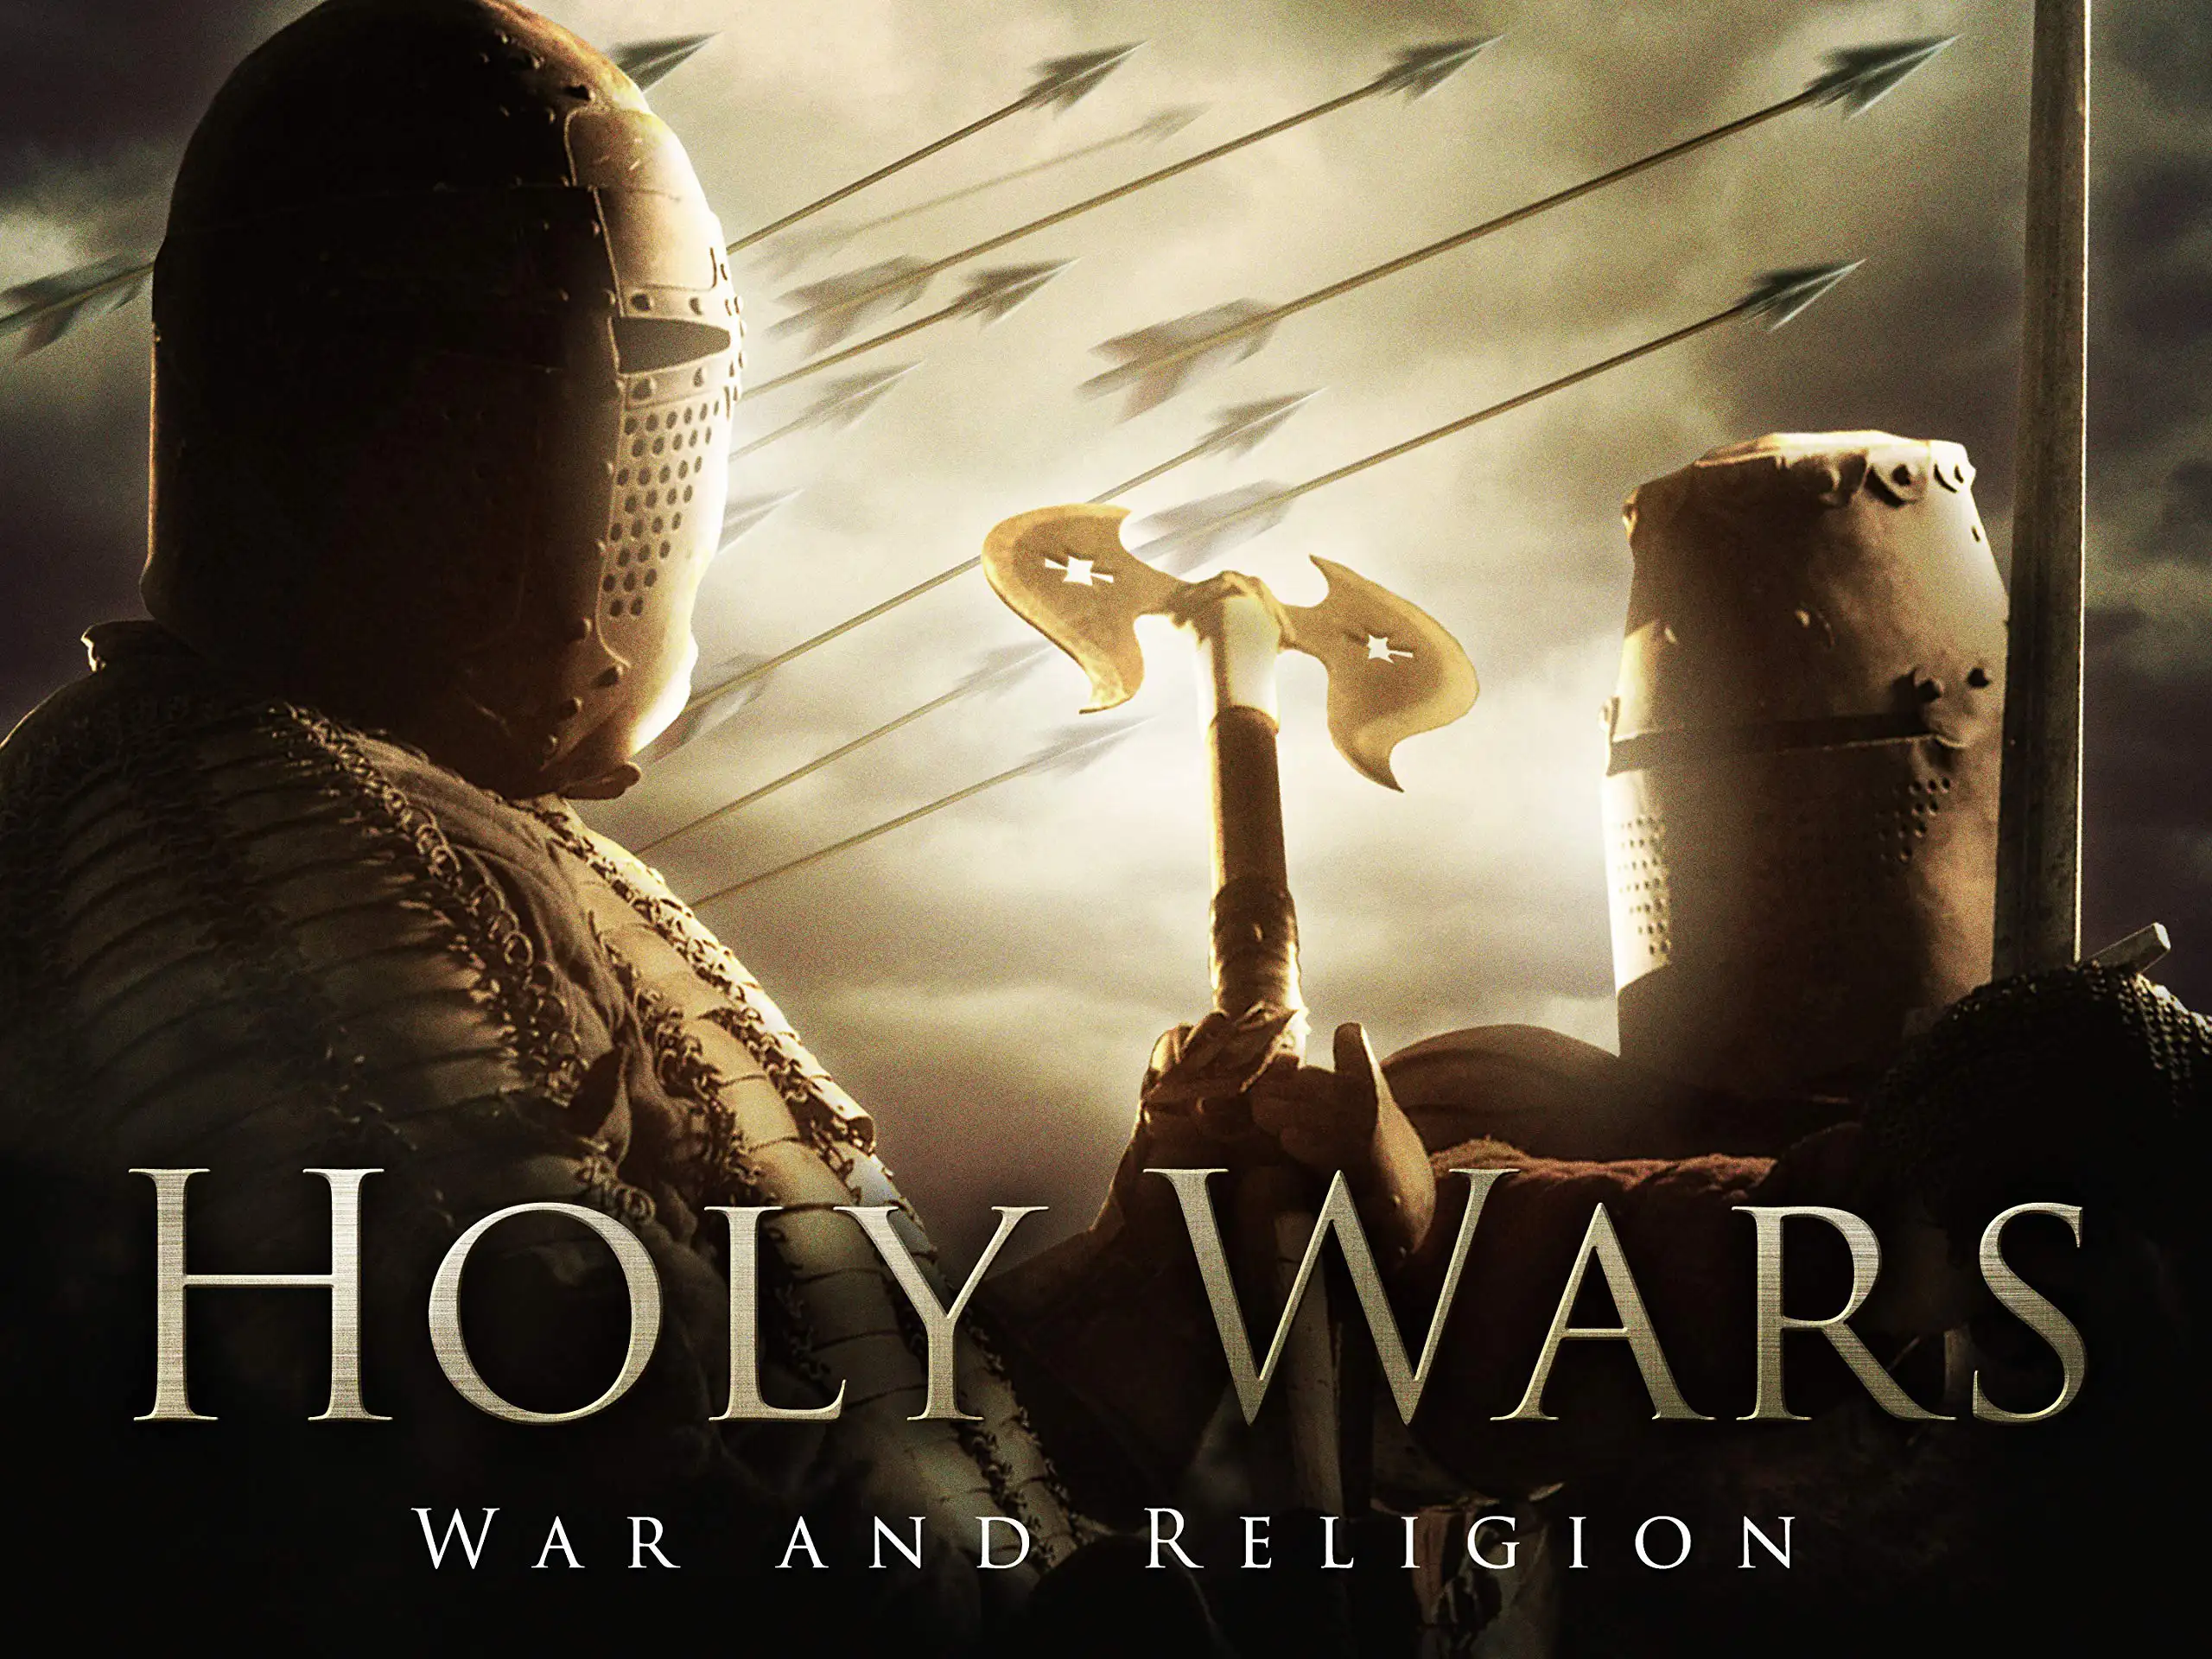 The Holy Wars: War and Religion episode 3